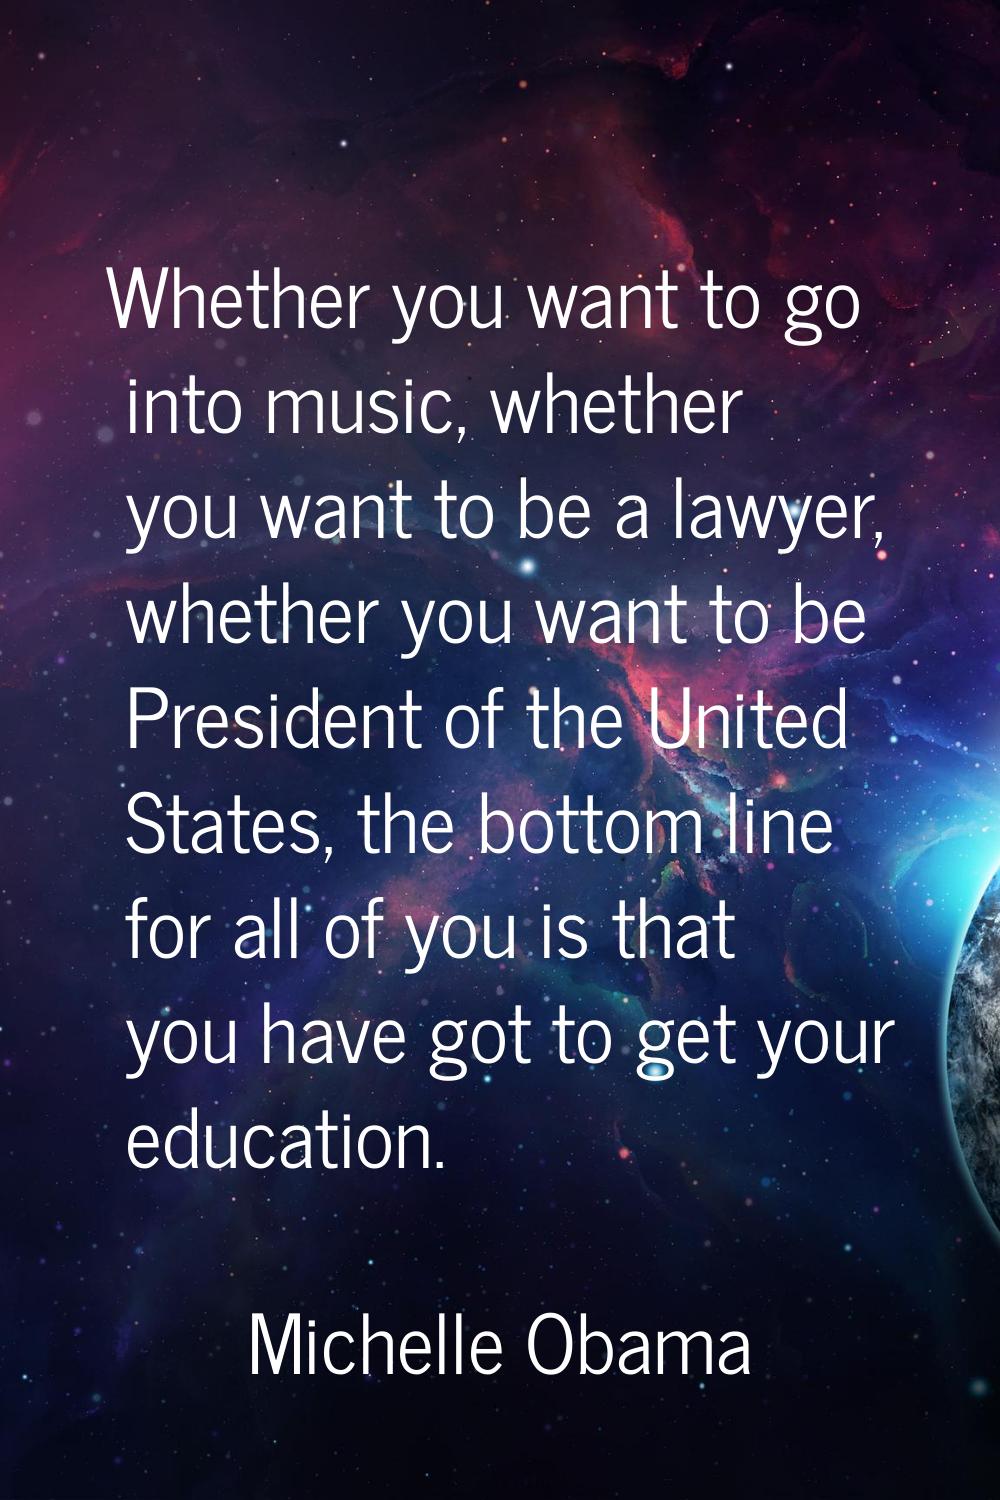 Whether you want to go into music, whether you want to be a lawyer, whether you want to be Presiden